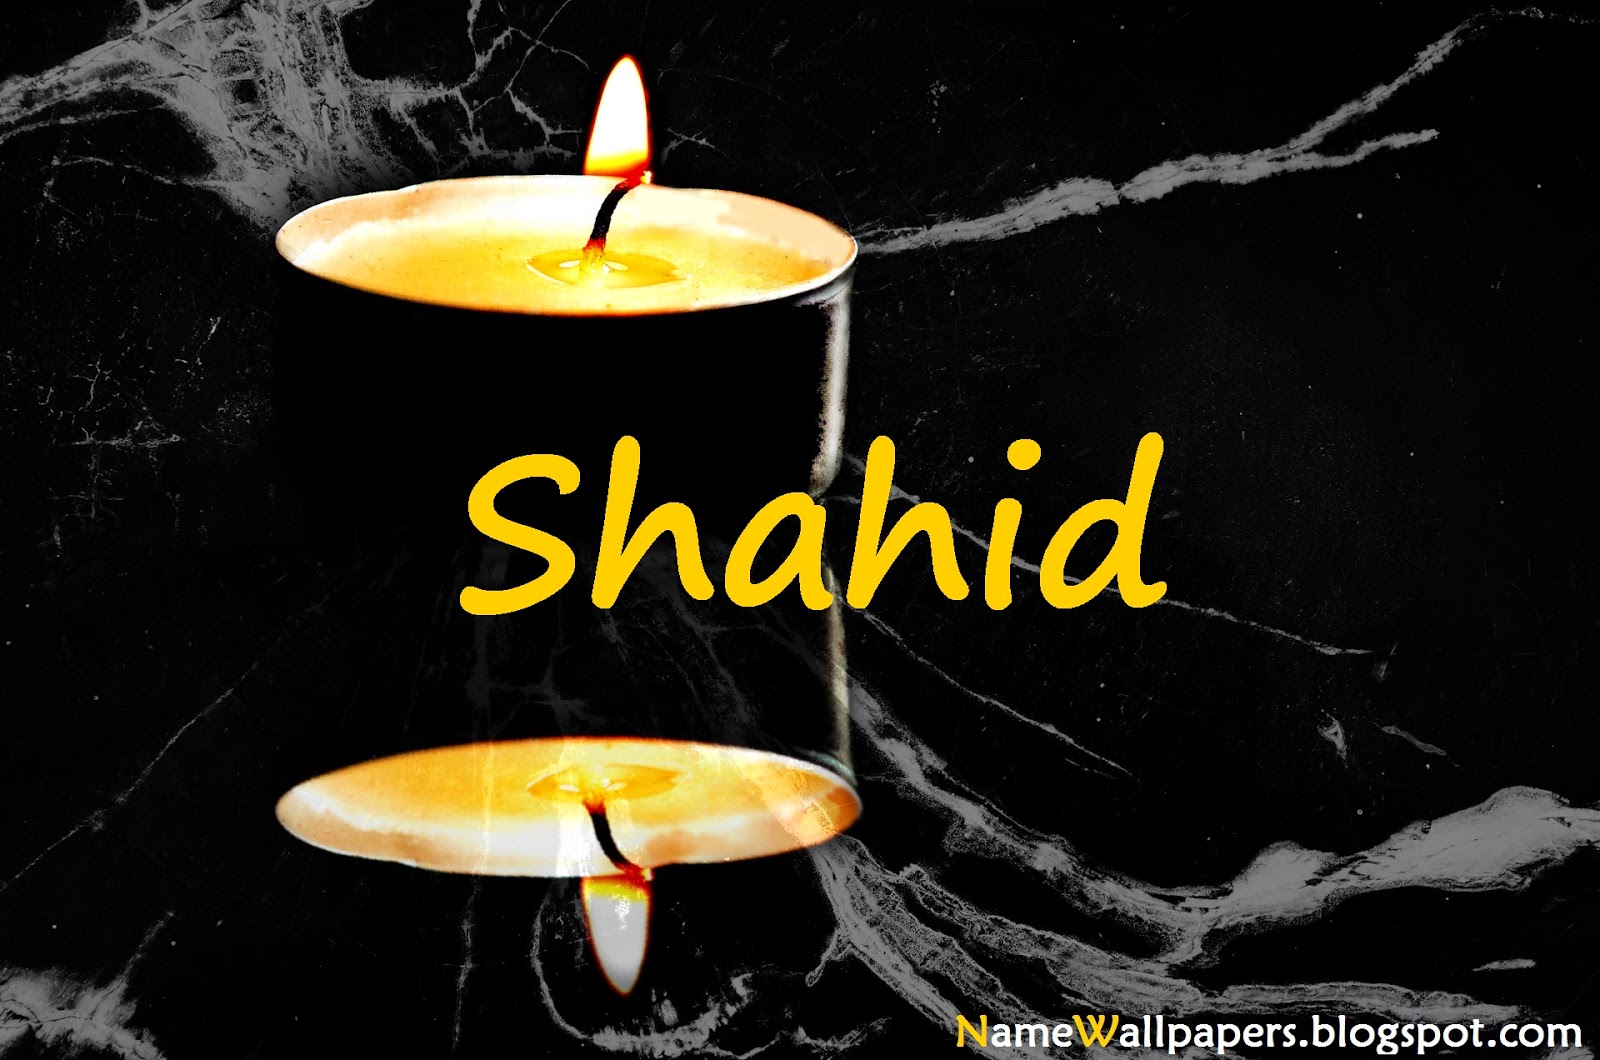 shahid name wallpaper,lighting,candle,still life photography,font,darkness